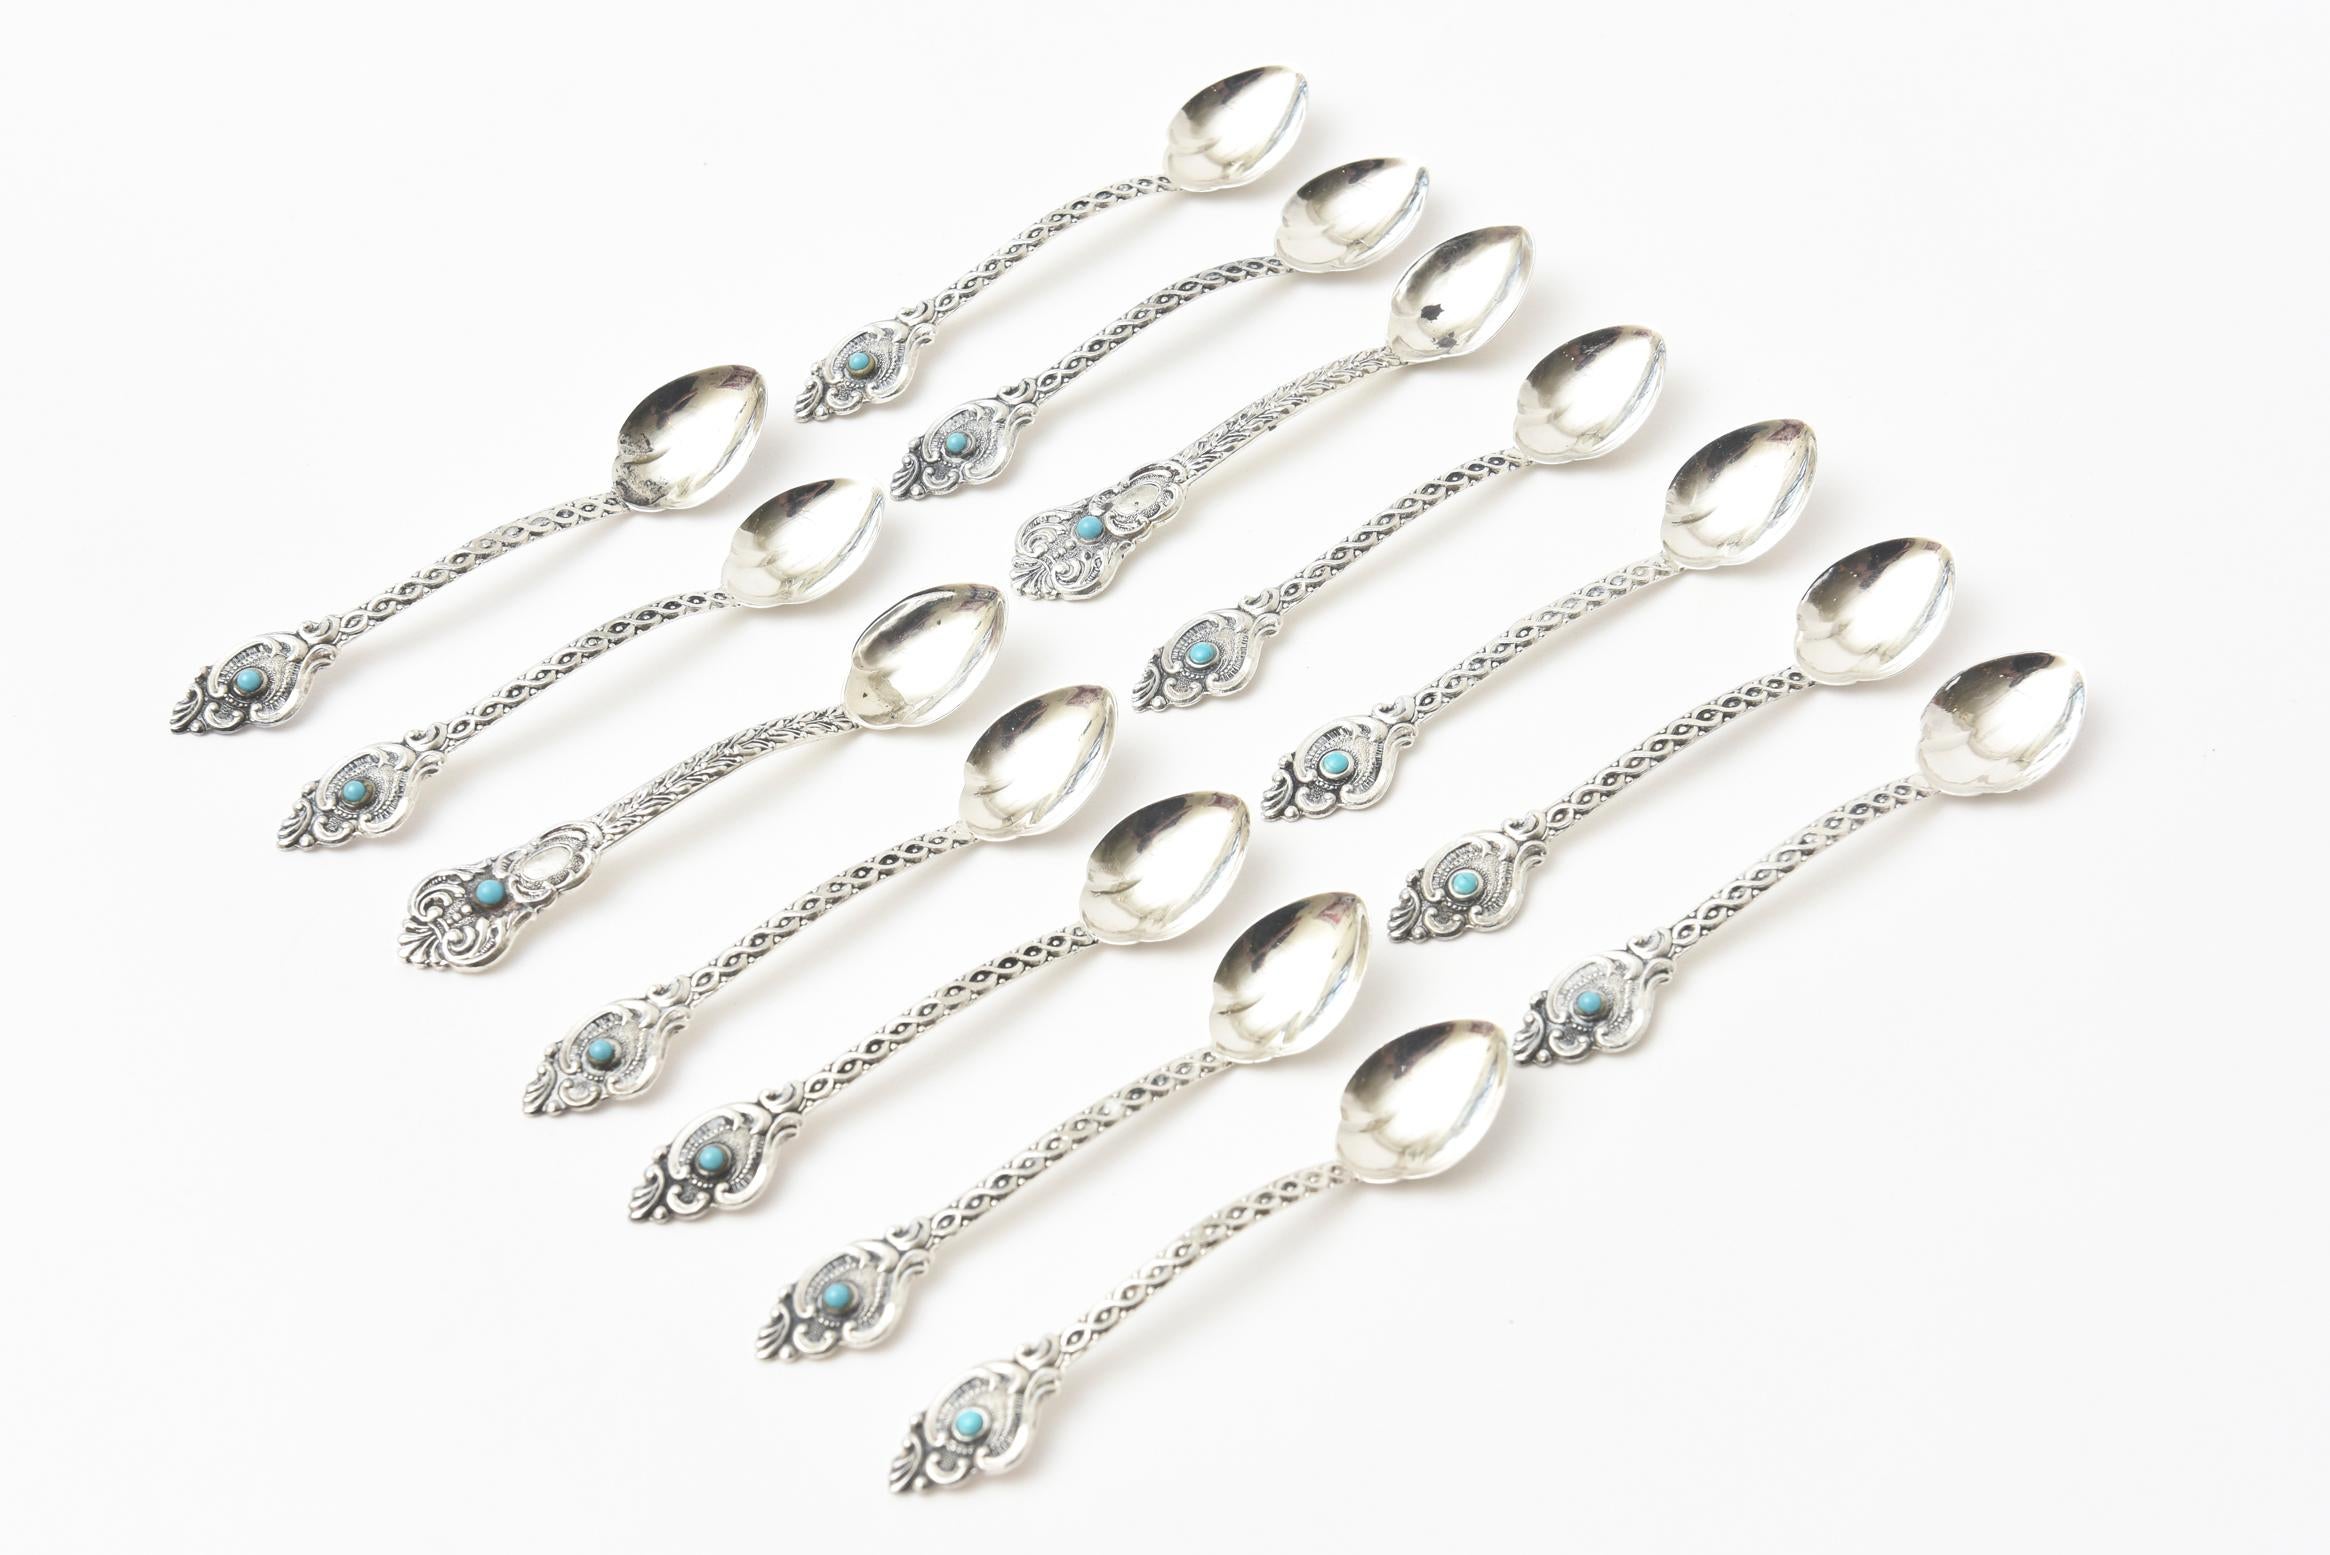 These lovely and regal set of 14 sterling silver and turquoise demitasse, espresso and serving spoons are vintage. They are hallmarked Prata 833 and hand wrought. They are from Brazil and from the 1970s. There are two spoons that weigh more and are